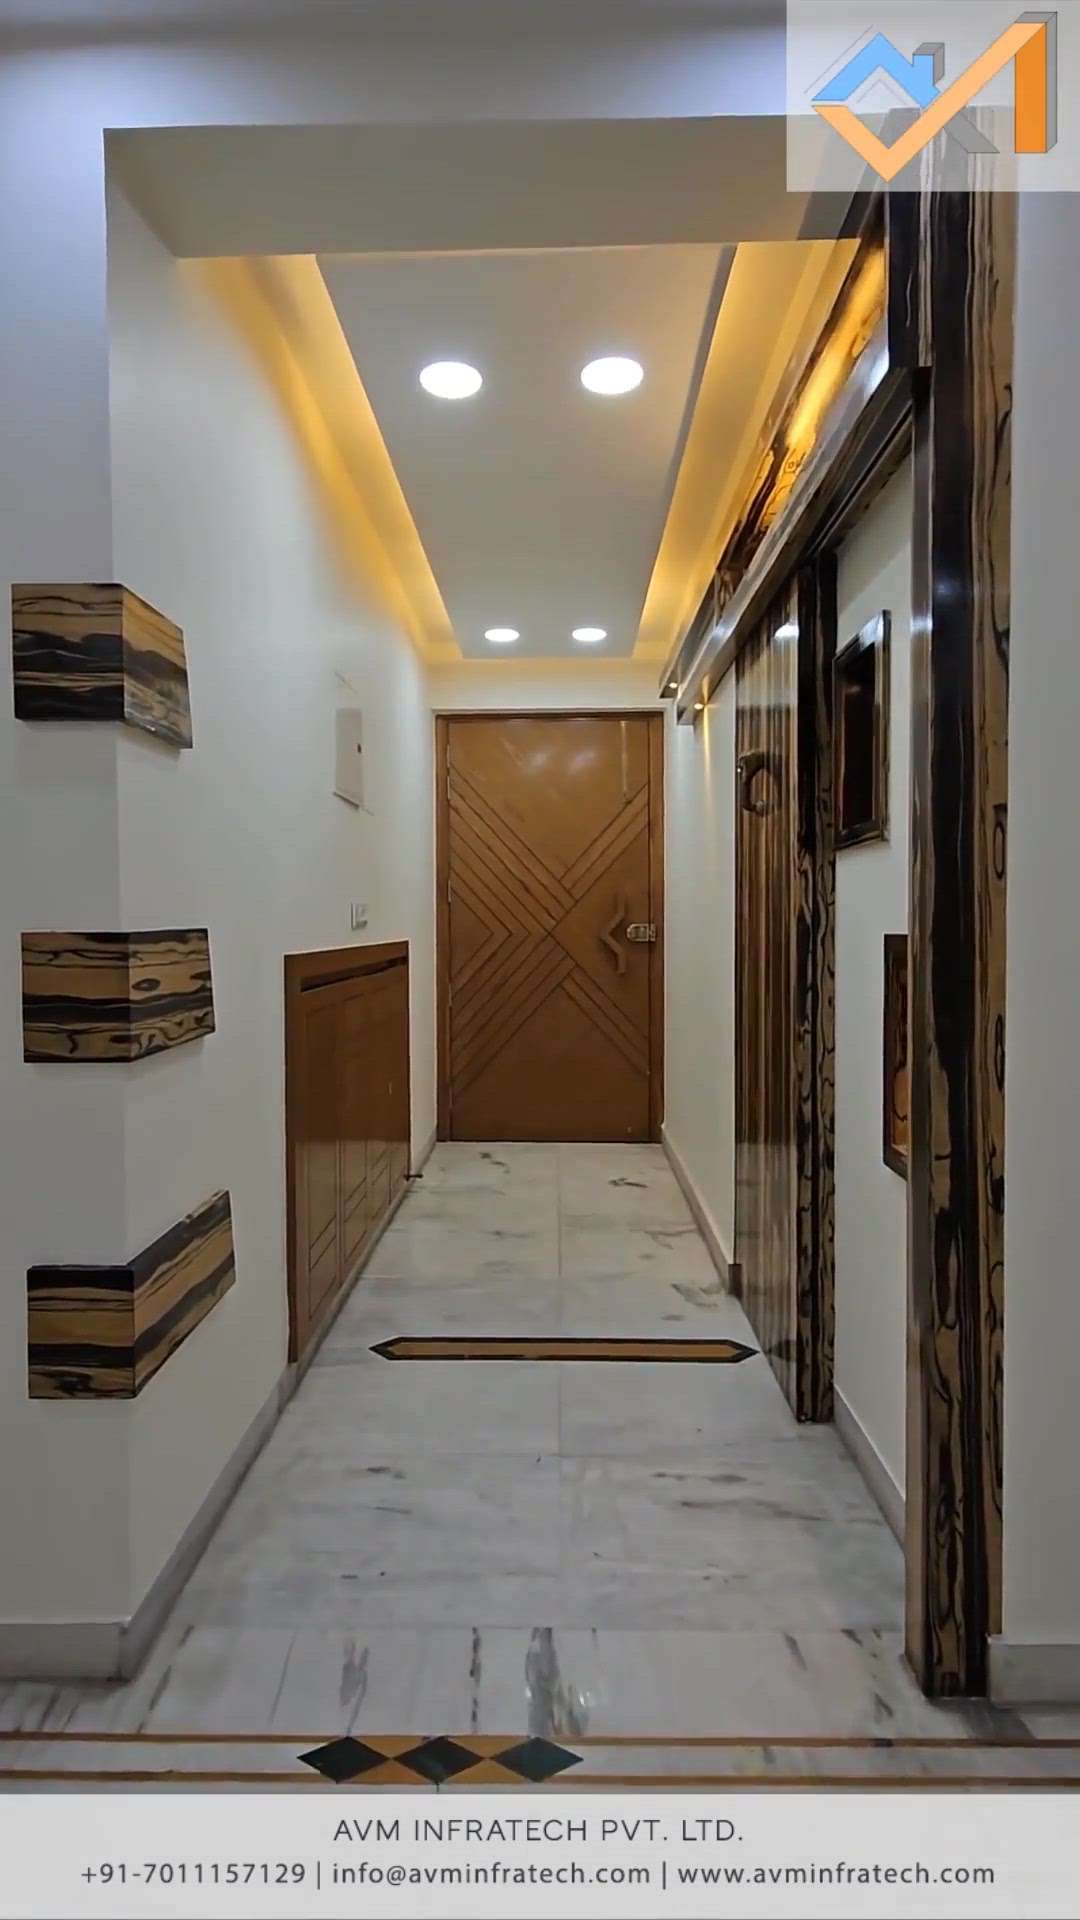 A welcoming entry foyer that makes sense and can give warm reciprocation to your guests!


Follow us for more such amazing updates. 
.
.
#entry #entryway #entrywaydecor #entrydoor #entrywaydesign #entrywayideas #entrywaygoals #door #doors #veneer #veneers #foyer #foyerdecor #foyerdesign #avminfratech #shoerack #falseceiling #ceilingdesign #ceilinglight #ceilingdecor #renovation